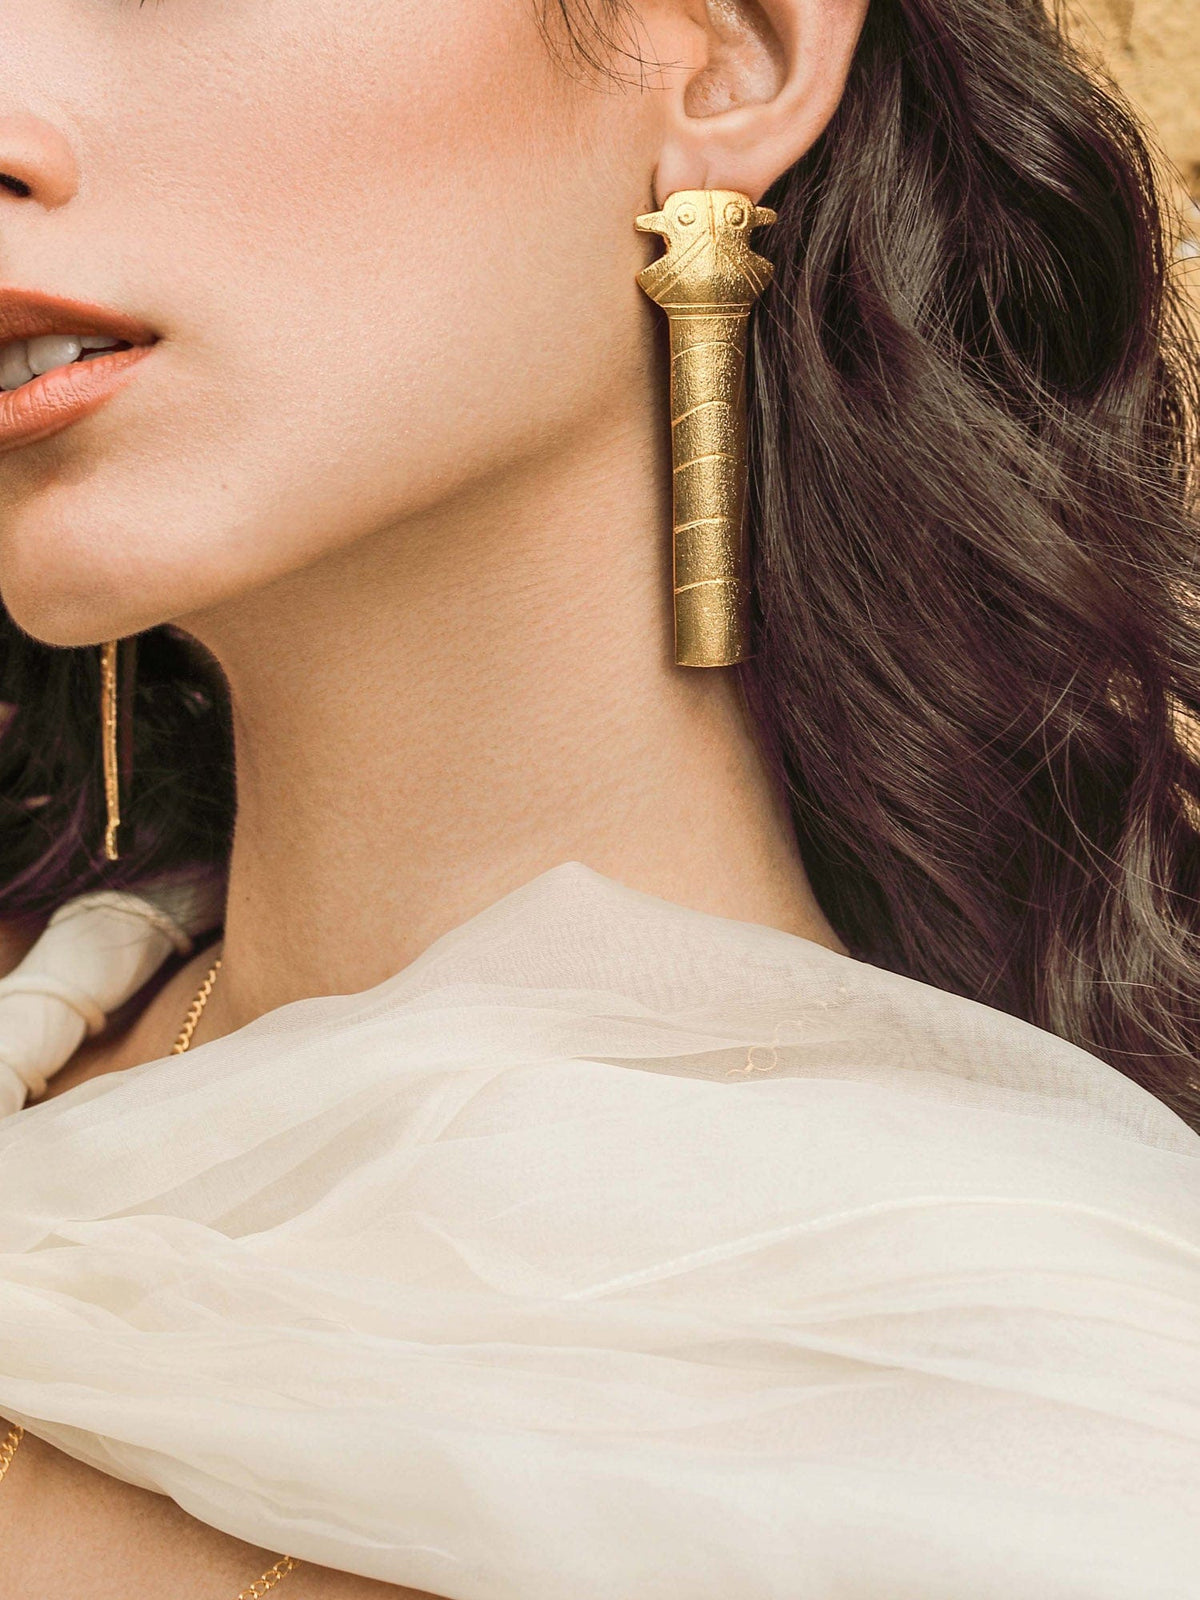 Statuesque mismatched earrings